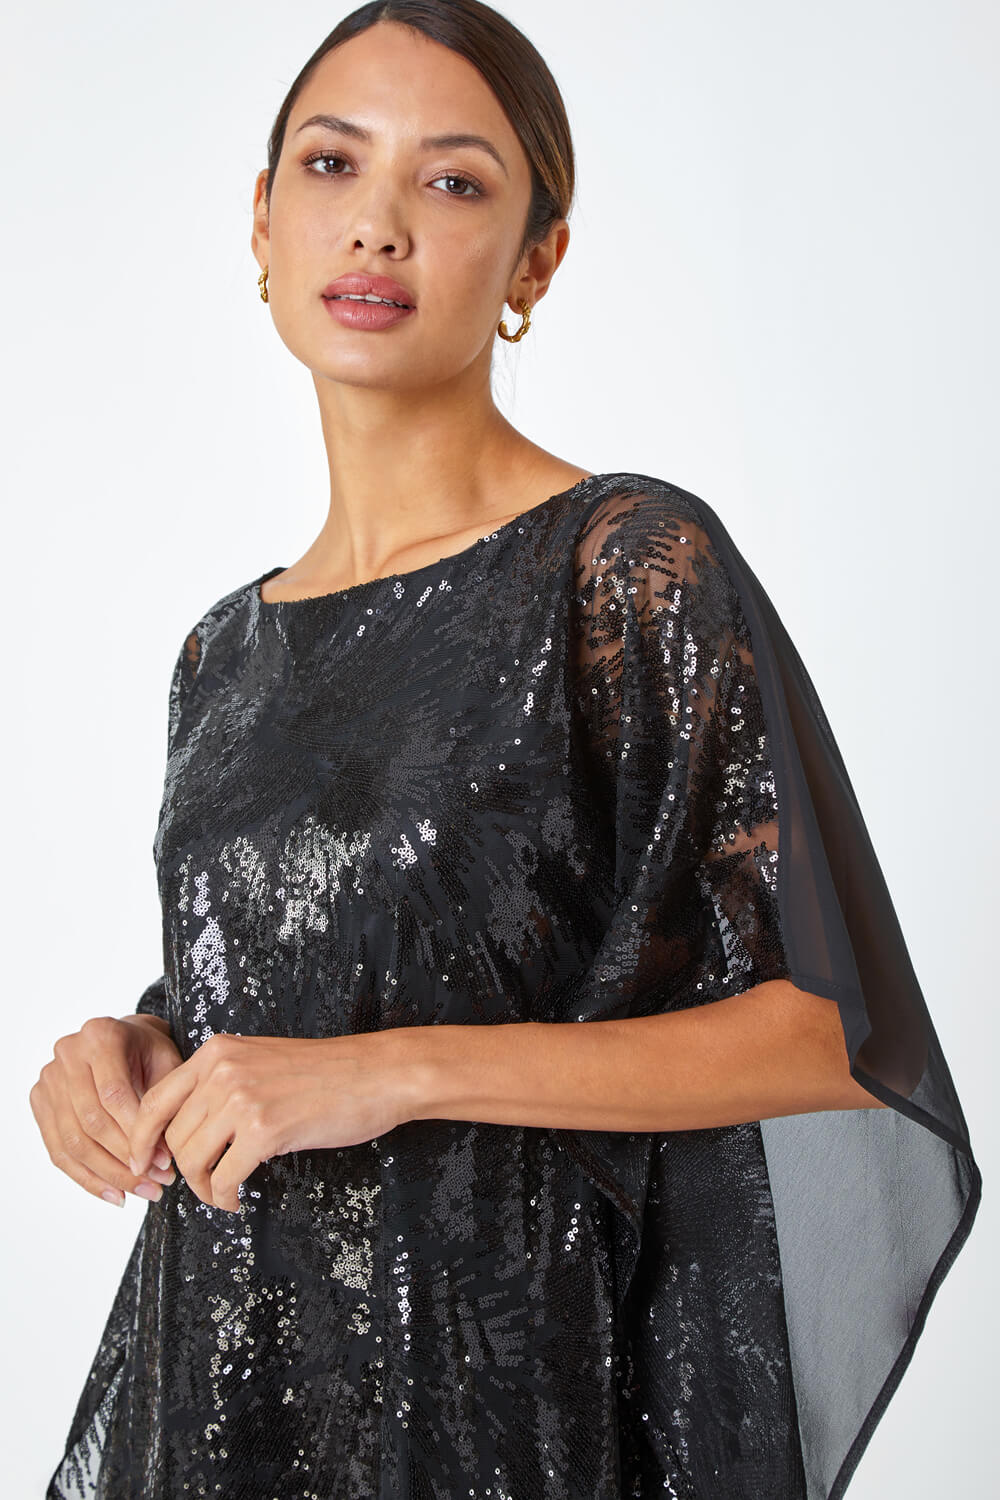 Black Sequin Overlay Stretch Top, Image 4 of 5